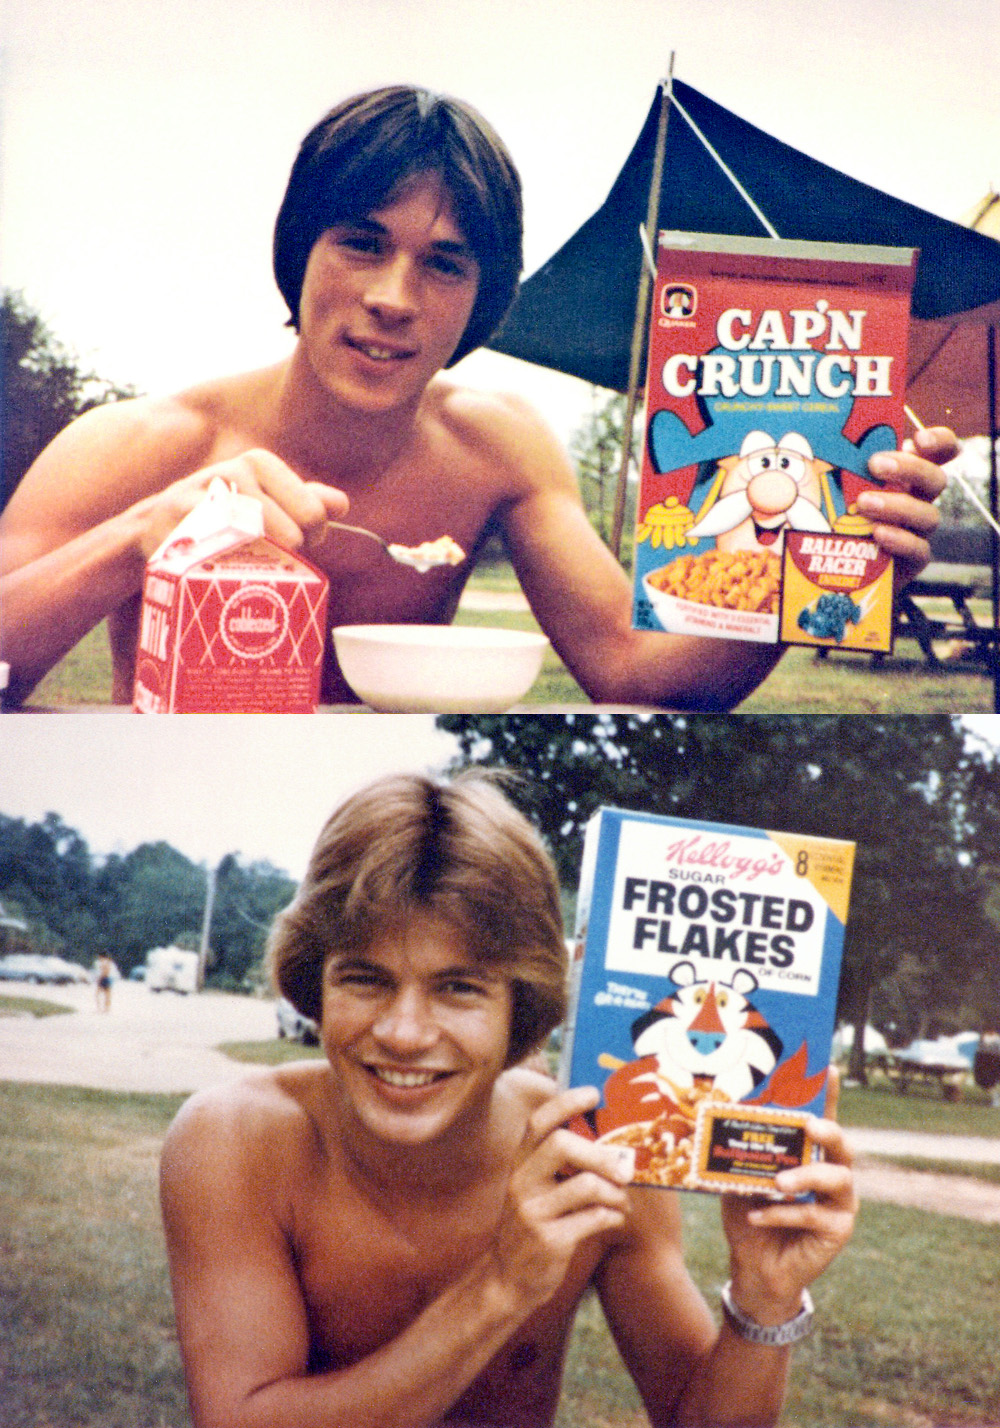 This was 1979, vacation at Myrtle Beach with my college friend Doug. View full size.